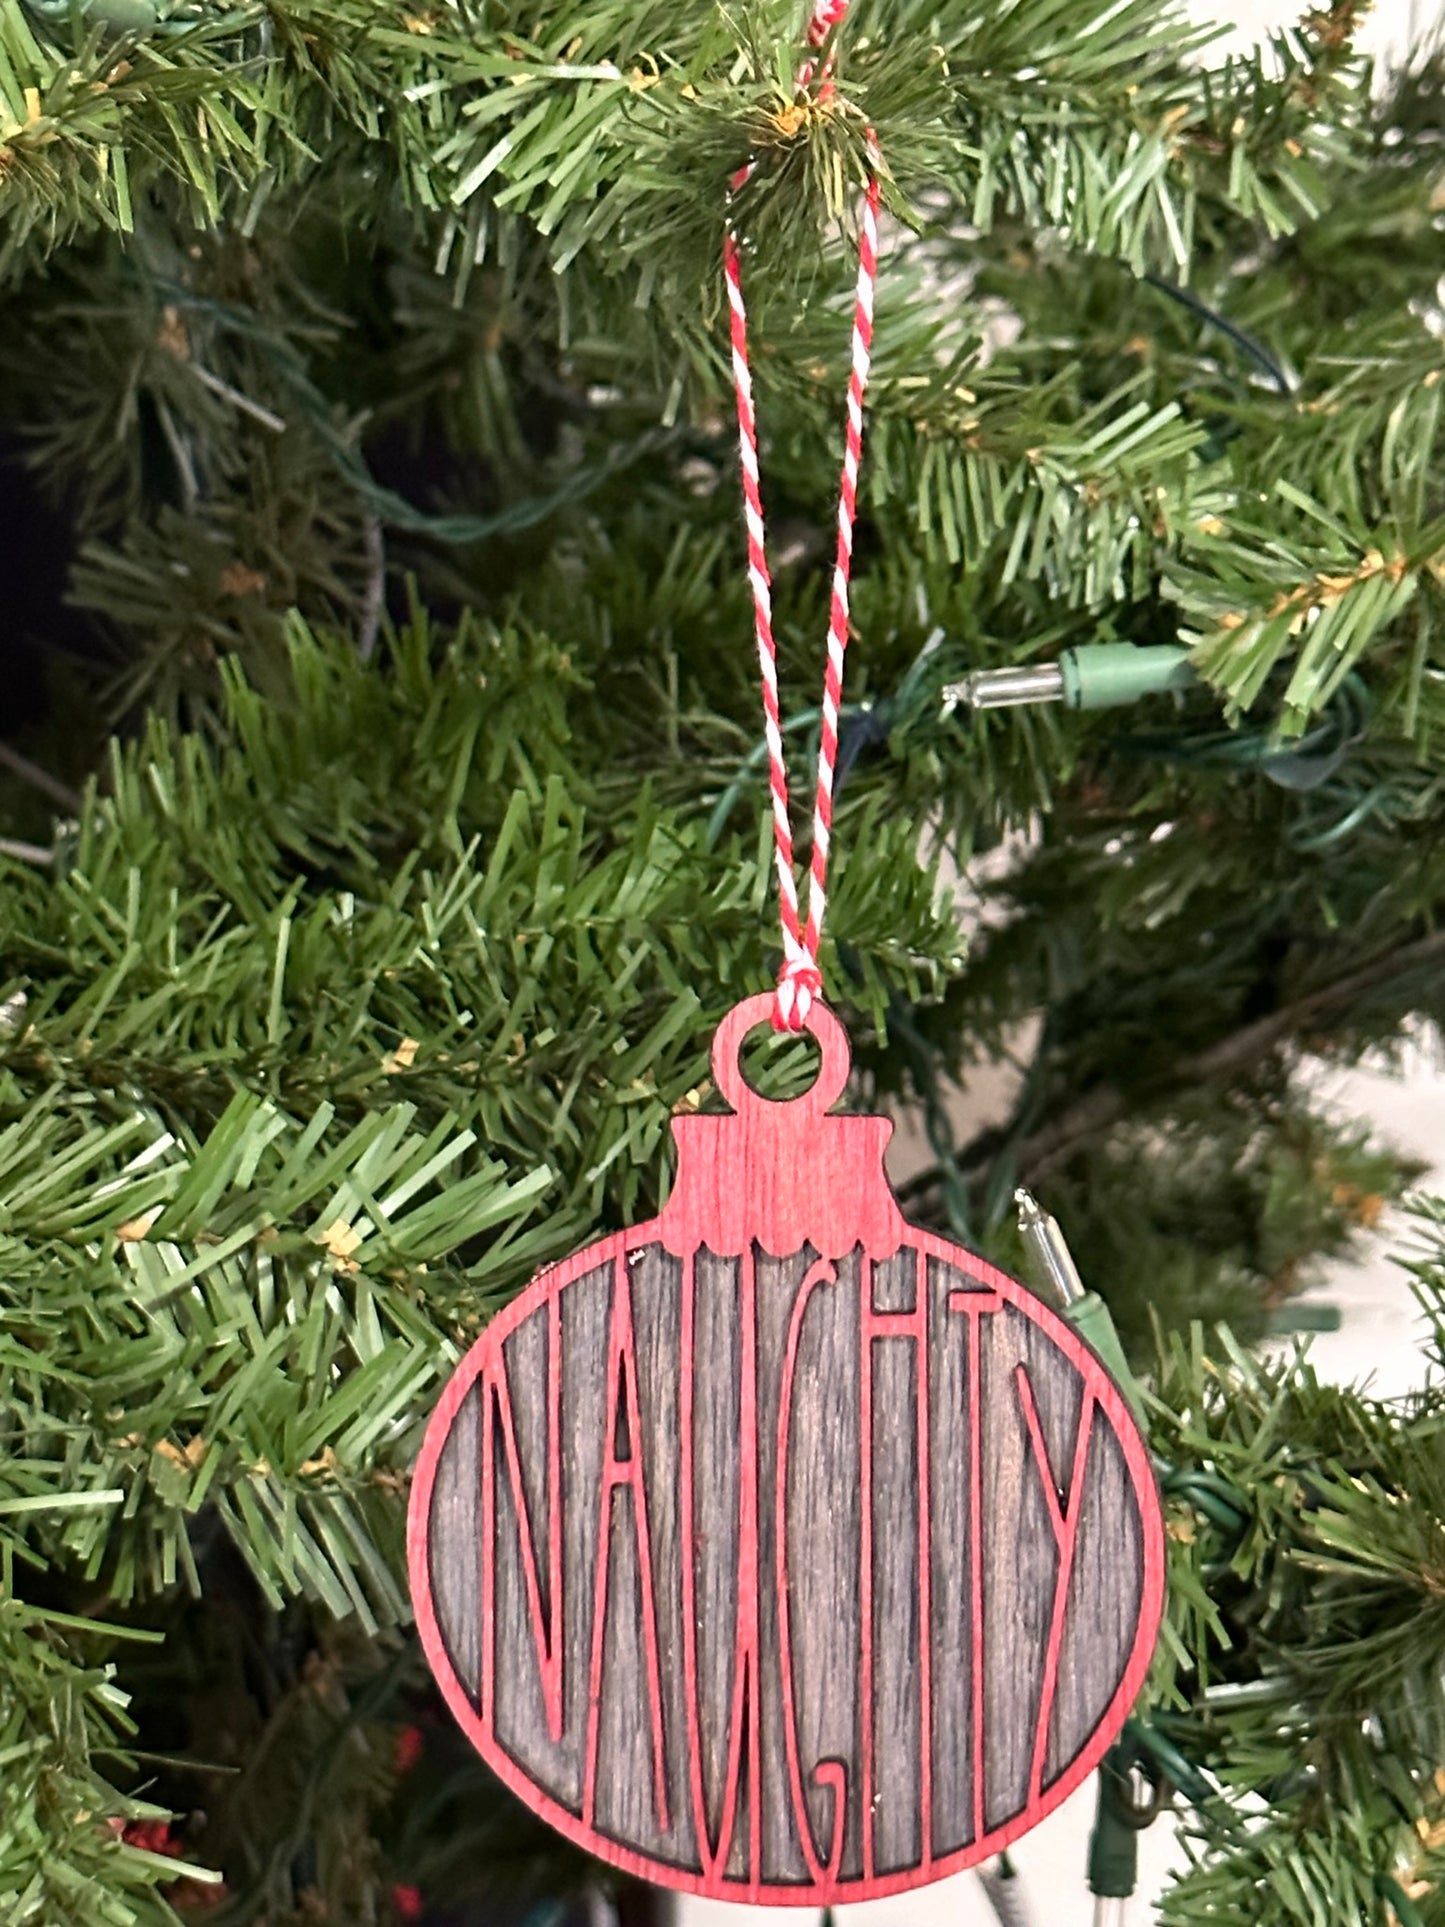 Laser Cut Wooden "Naughty" Ornament!